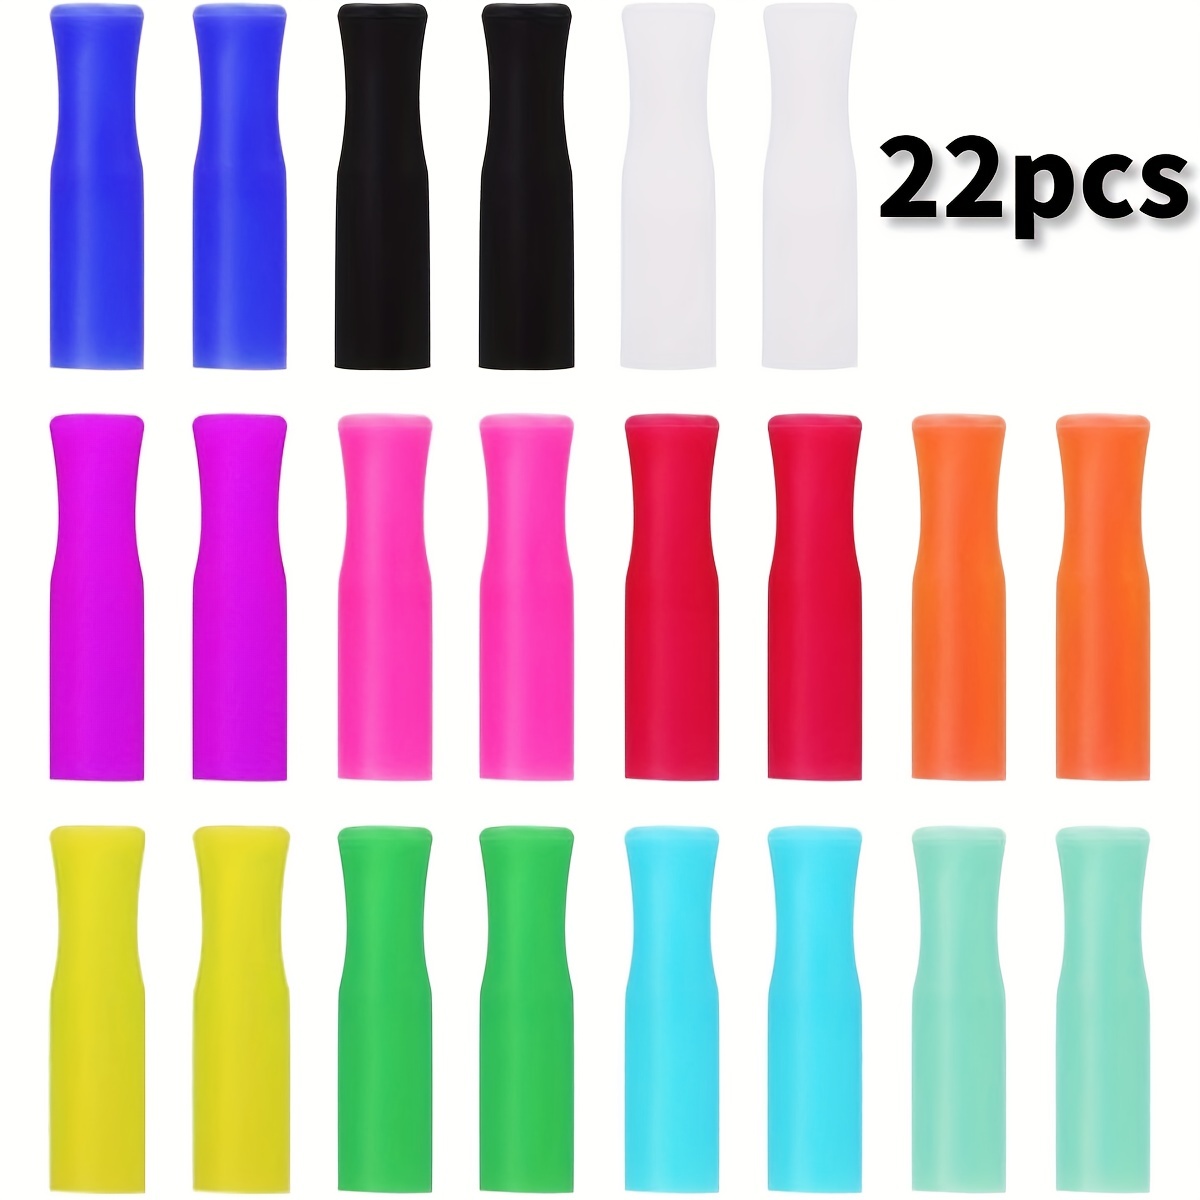 

22pcs, Reusable Straws Tips, Silicone Straw Tips, Multi-color Food Grade Straws Tips Covers Only Fit For 1/4 Inch Wide Stainless Steel Straws, Kitchen Accessaries, Dorm Essentials, Party Supplies